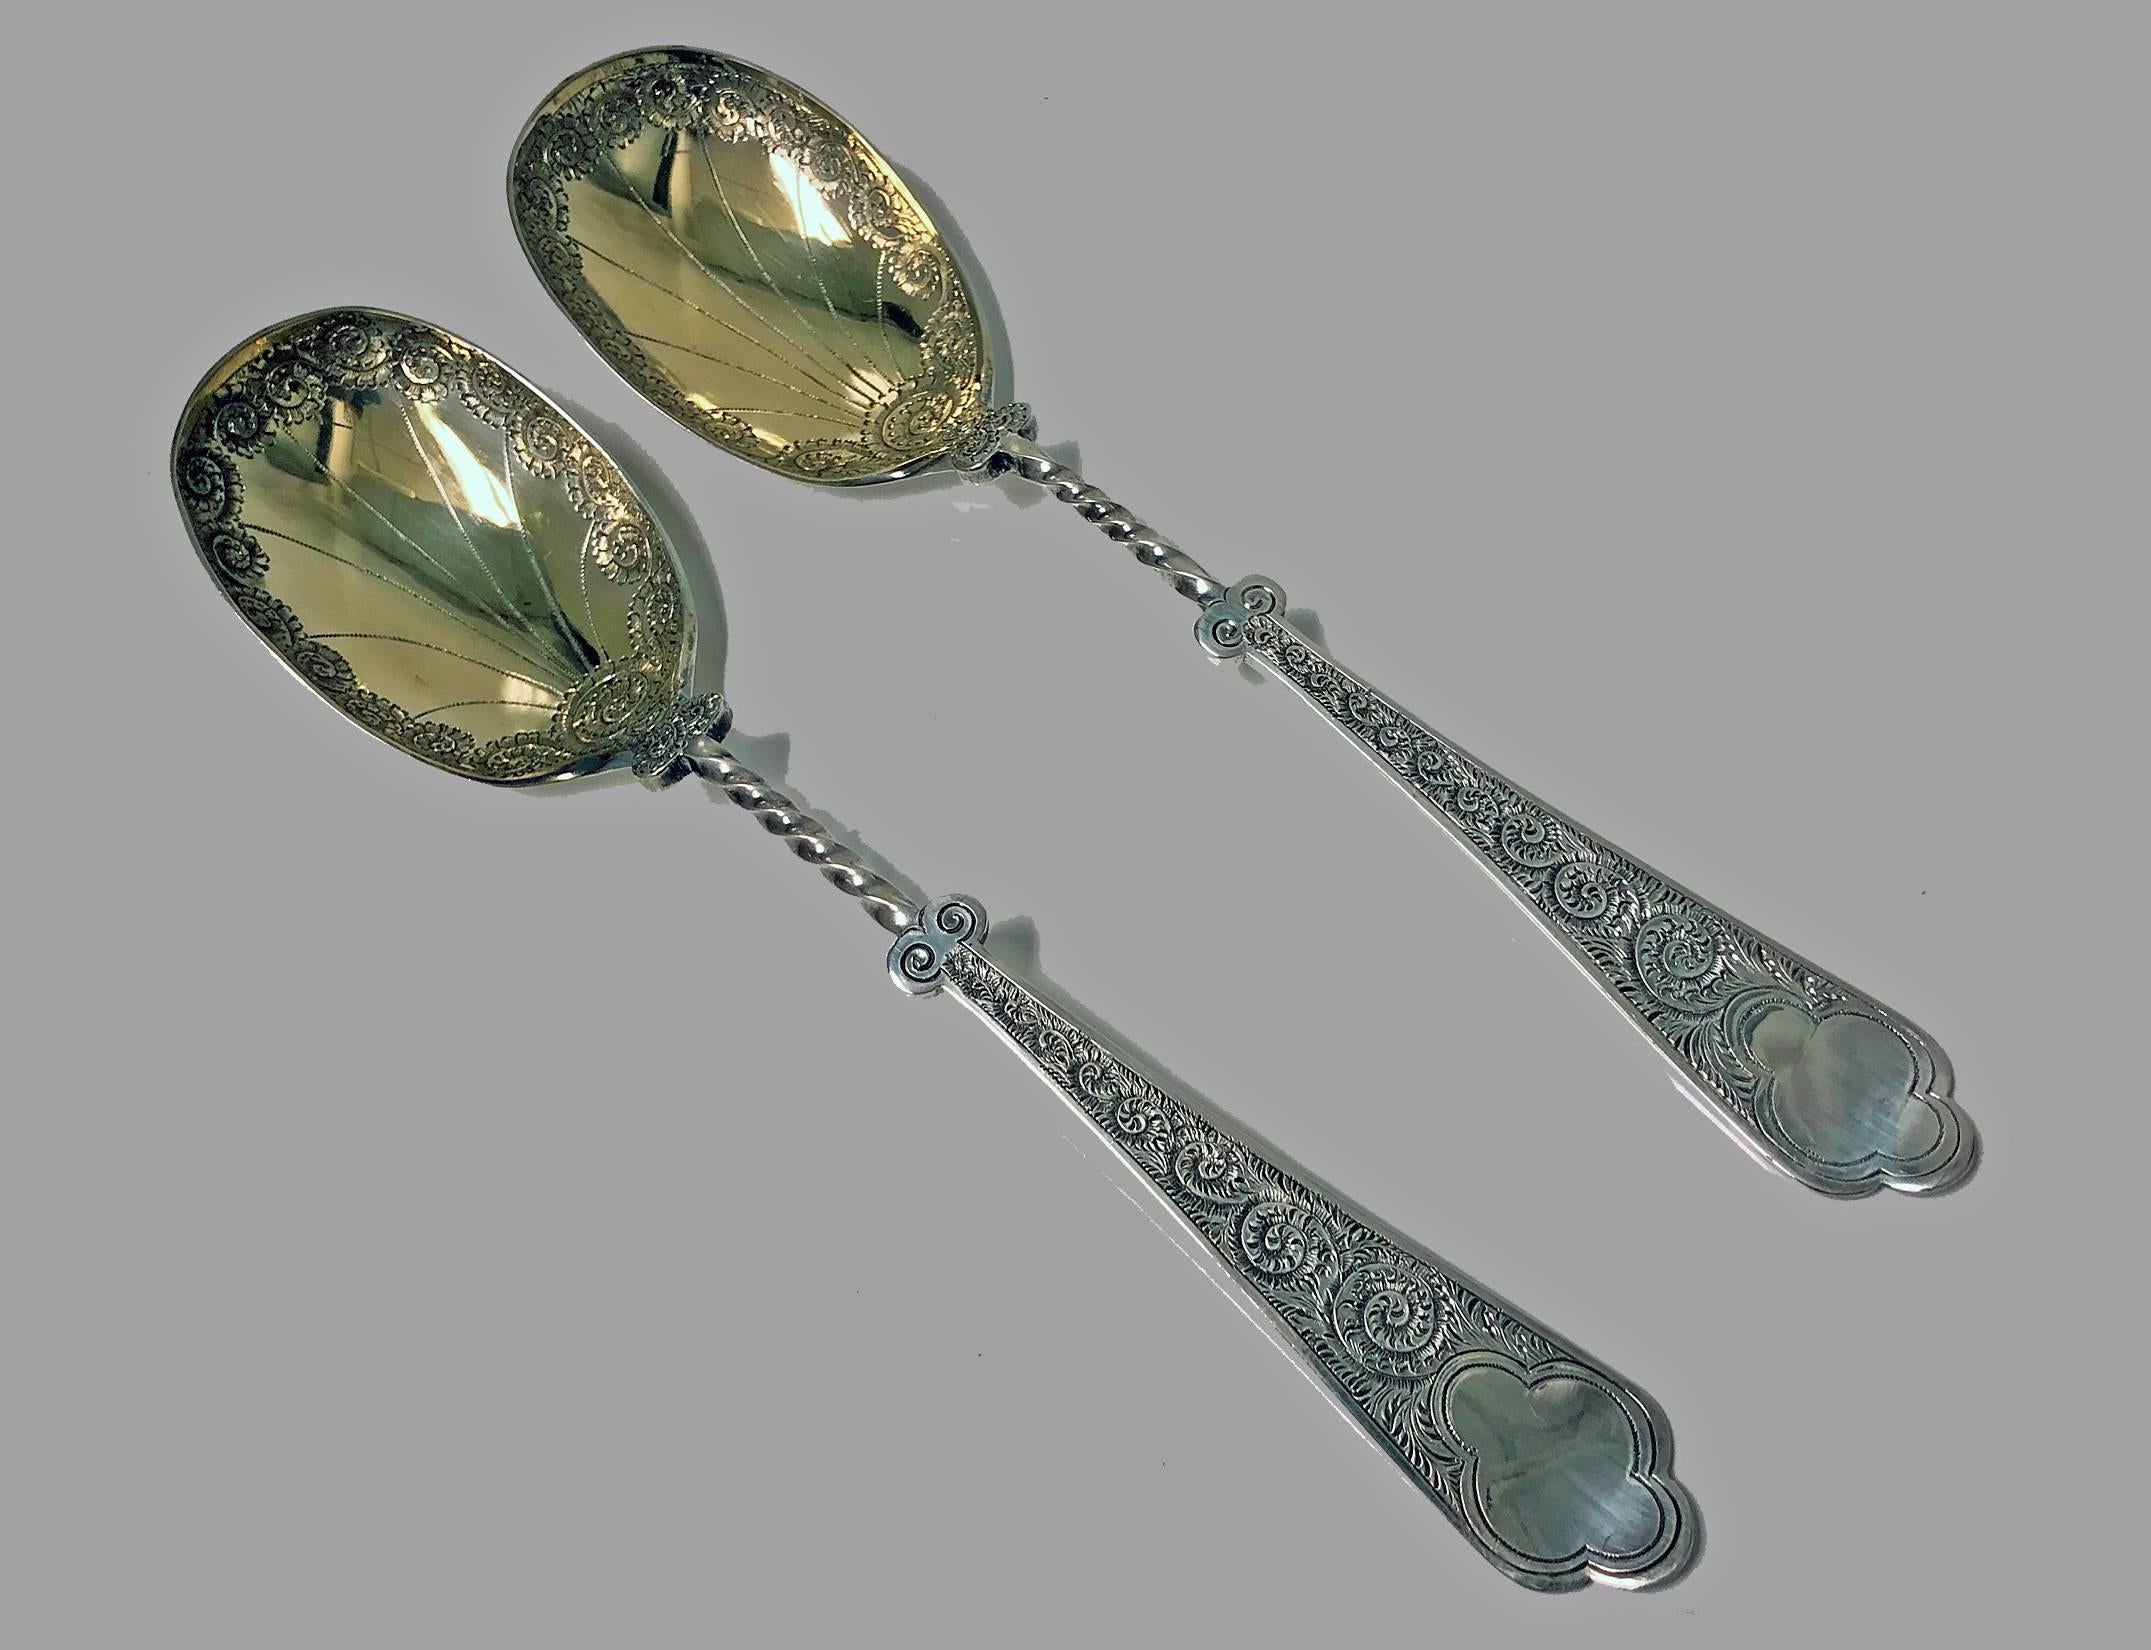 Antique Vermeil and Silver Plate Fruit Serving Set in fitted box, English, C. 1880, William Henry Beaumont & Co. The set comprising pair of fruit berry serving spoons, gilded bowls, twist spiral stems, scroll foliage tapered handles, together